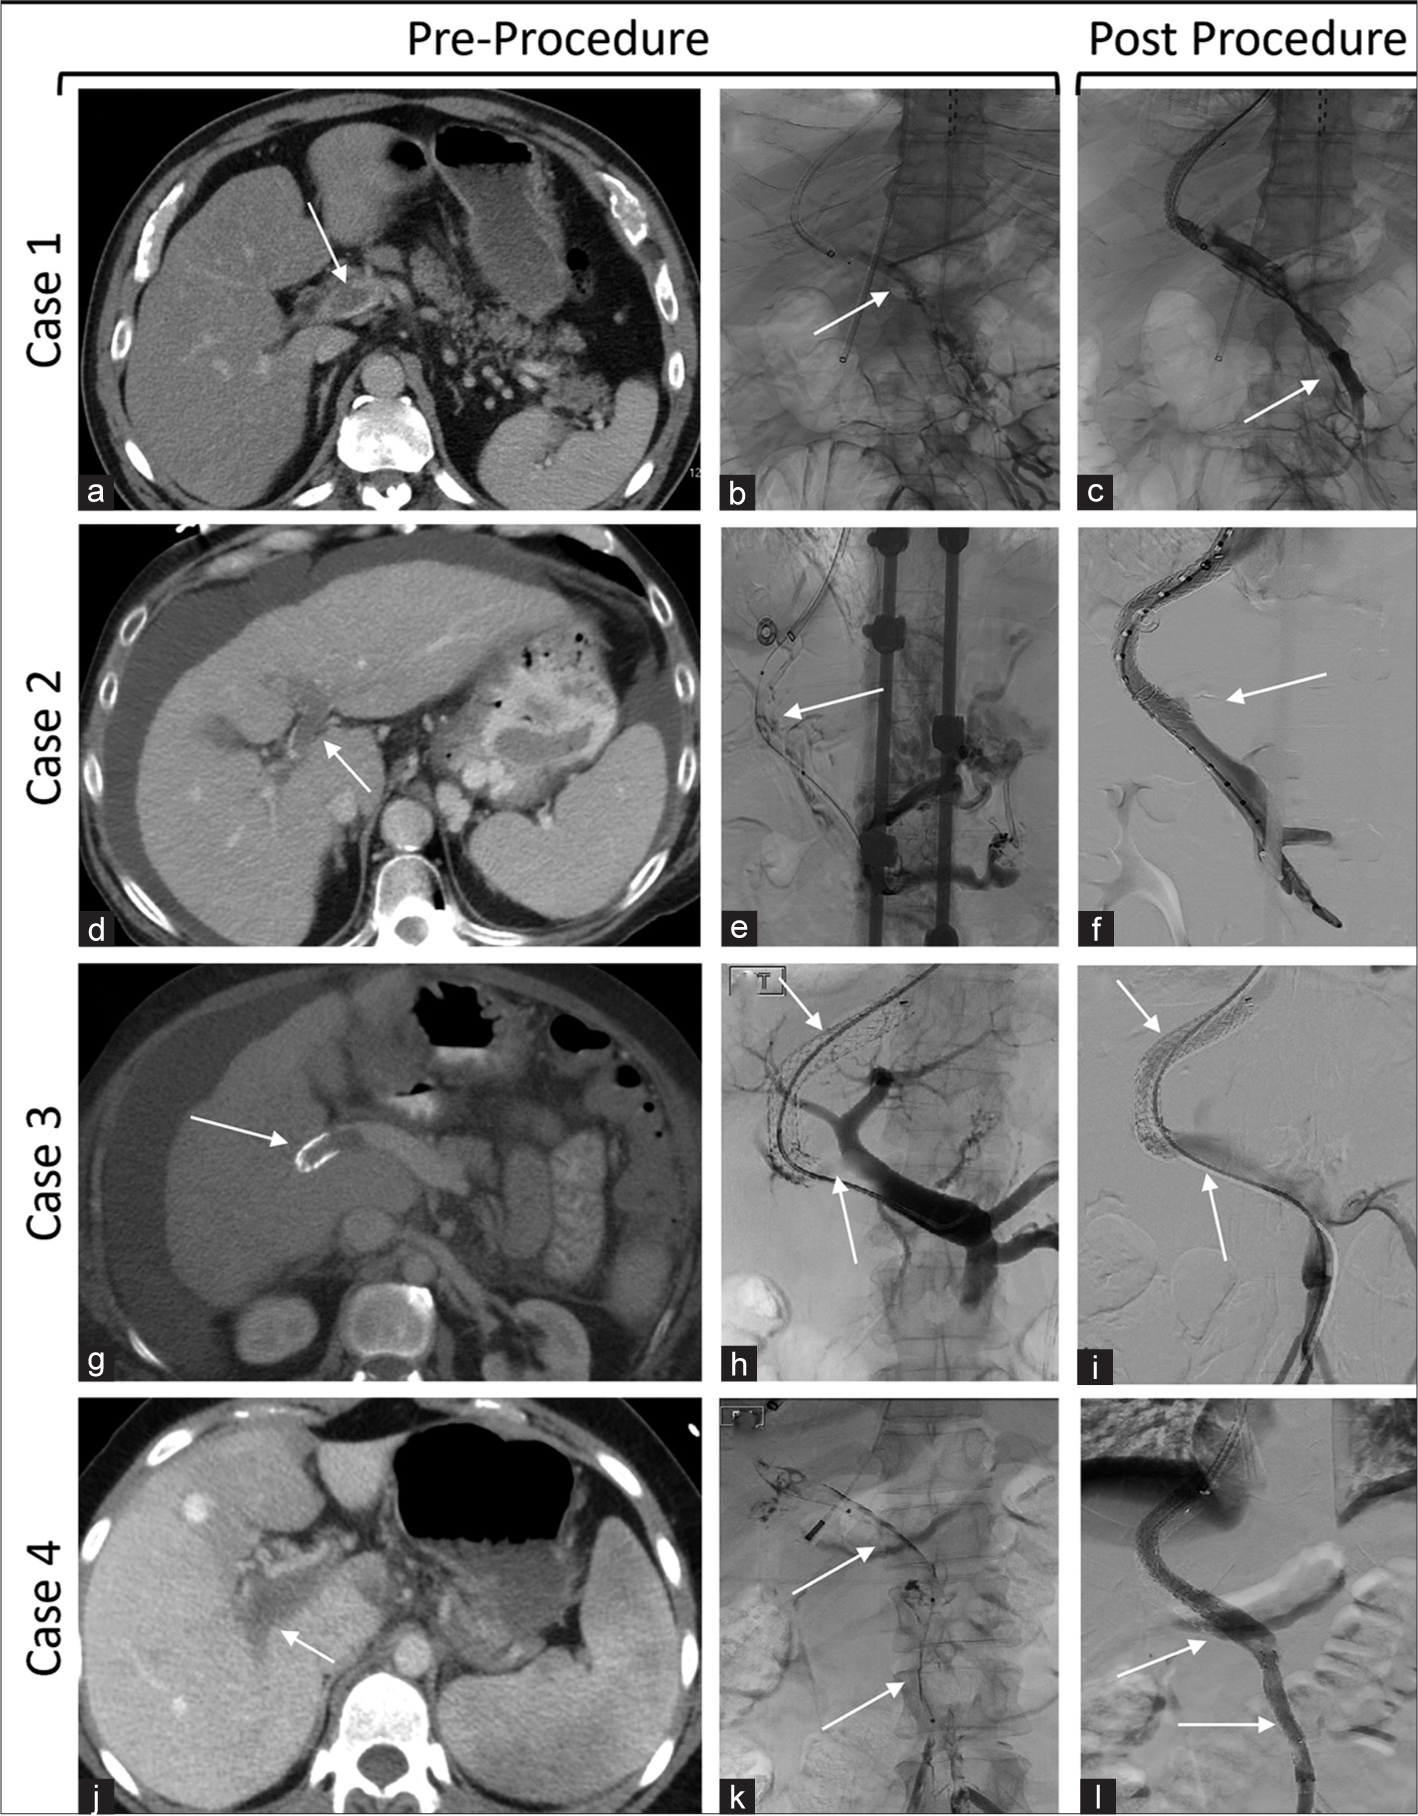 Mechanical thrombectomy with the novel InThrill thrombectomy catheter for portal vein thrombosis and occluded transjugular intrahepatic portosystemic shunt: A case series